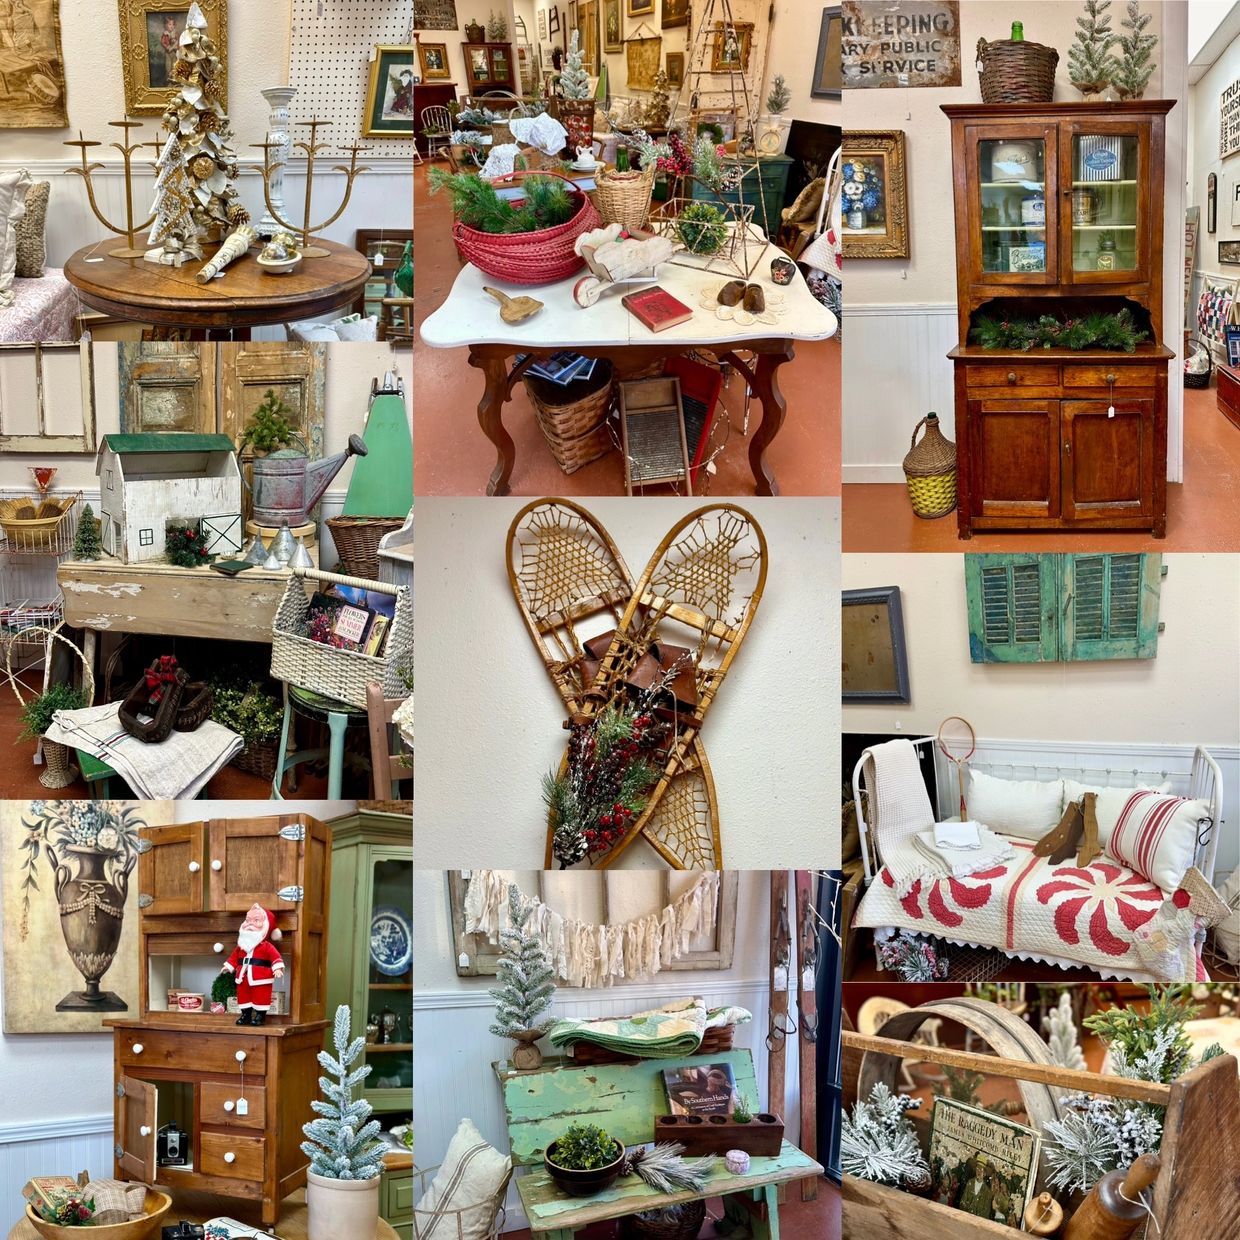 The Top 11 Locally-Owned Furniture and Decor Shops in the Boise Area